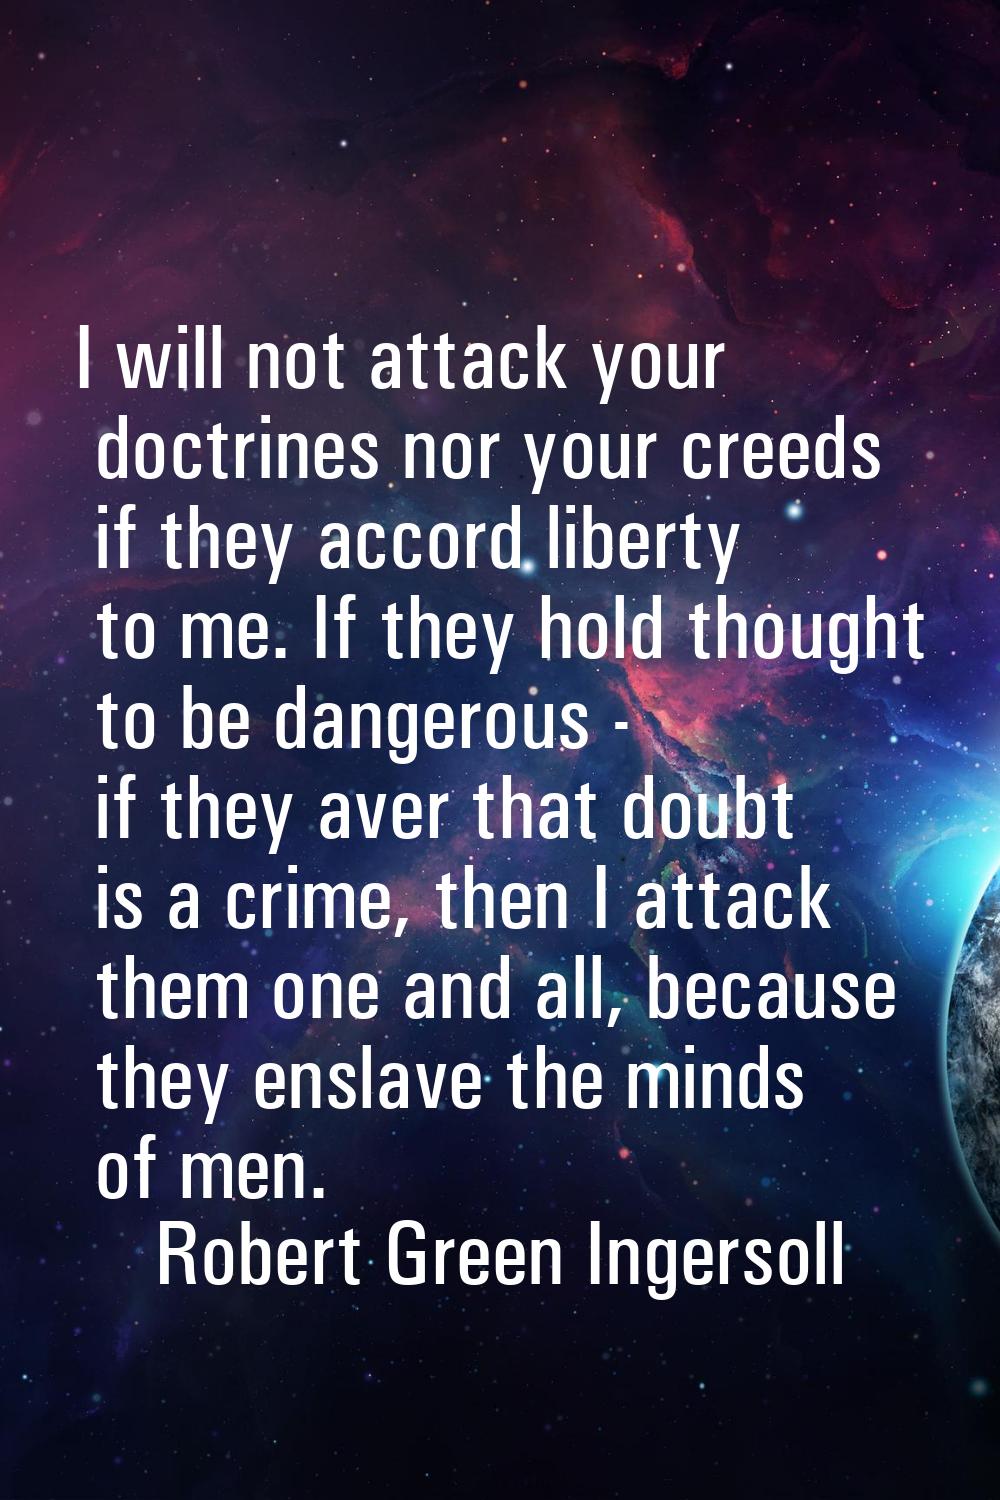 I will not attack your doctrines nor your creeds if they accord liberty to me. If they hold thought